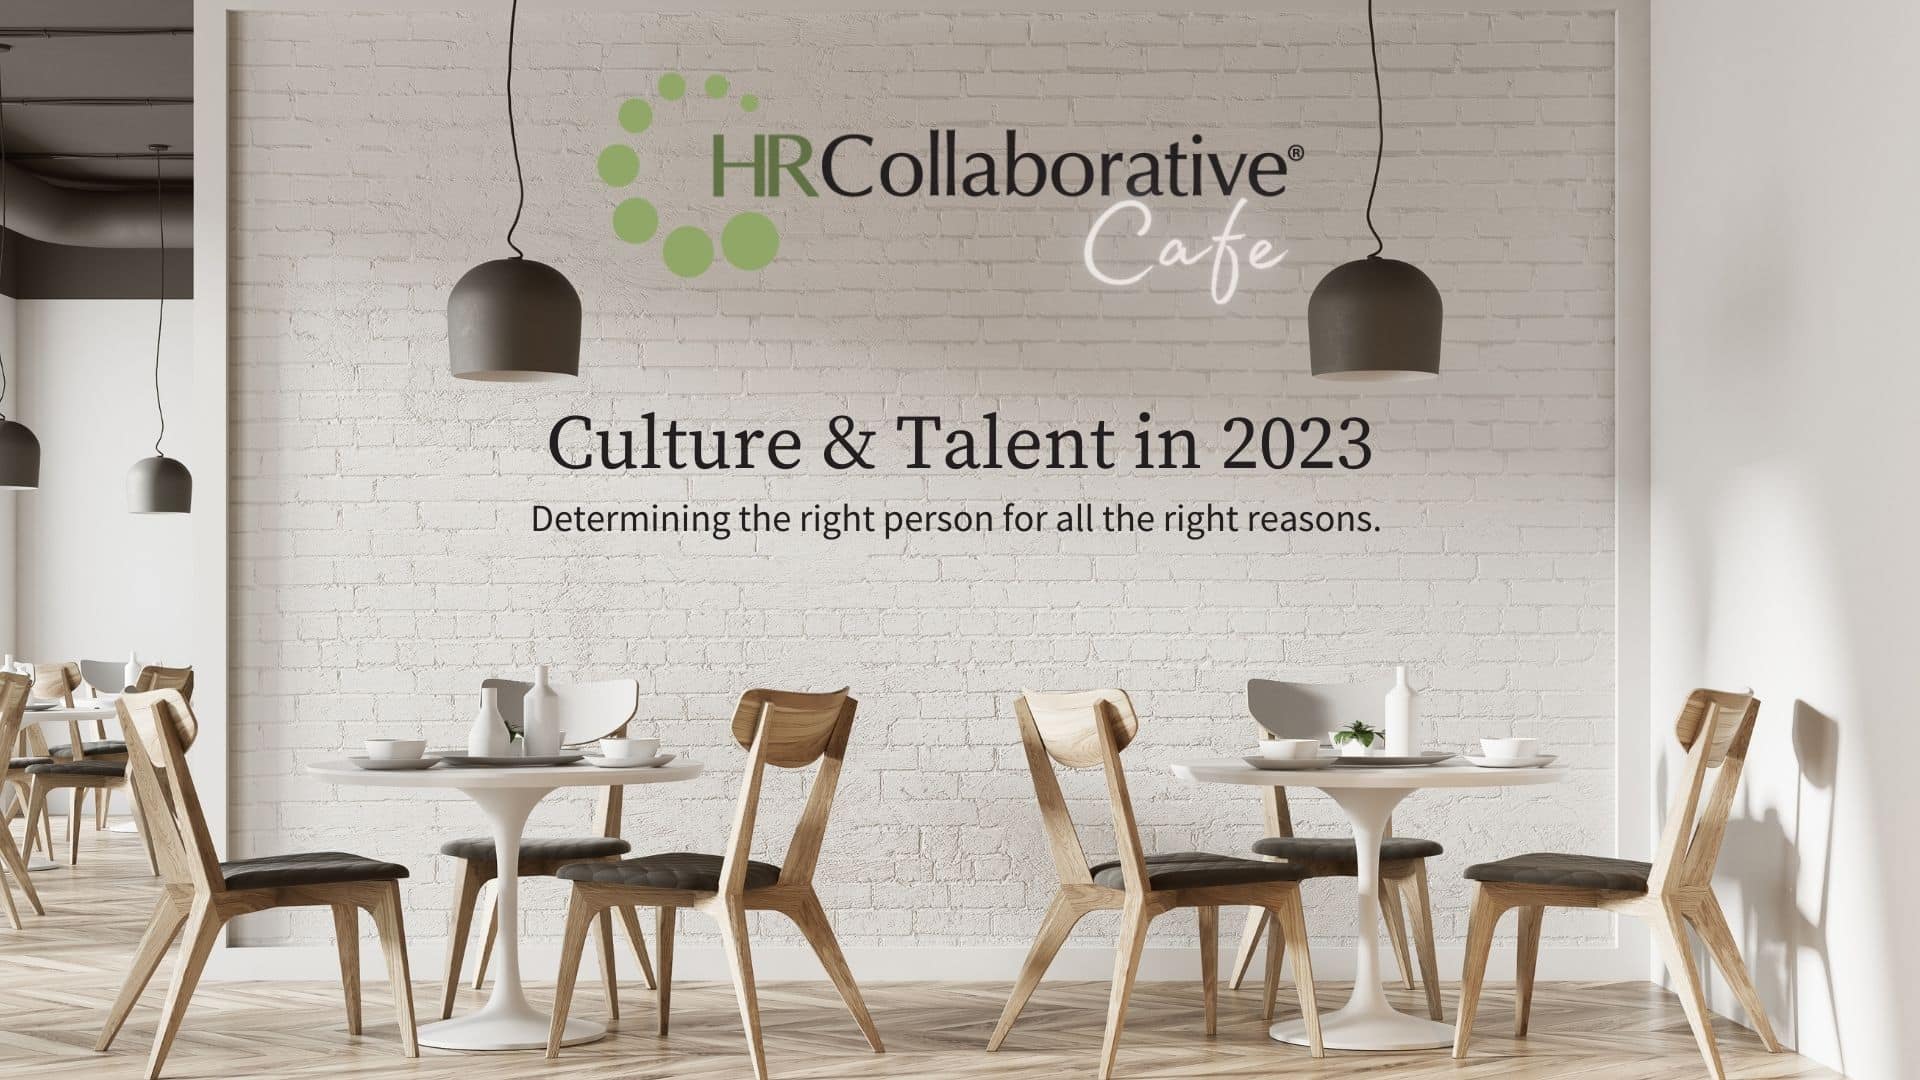 Collaborative Cafe: Culture & Talent in 2023